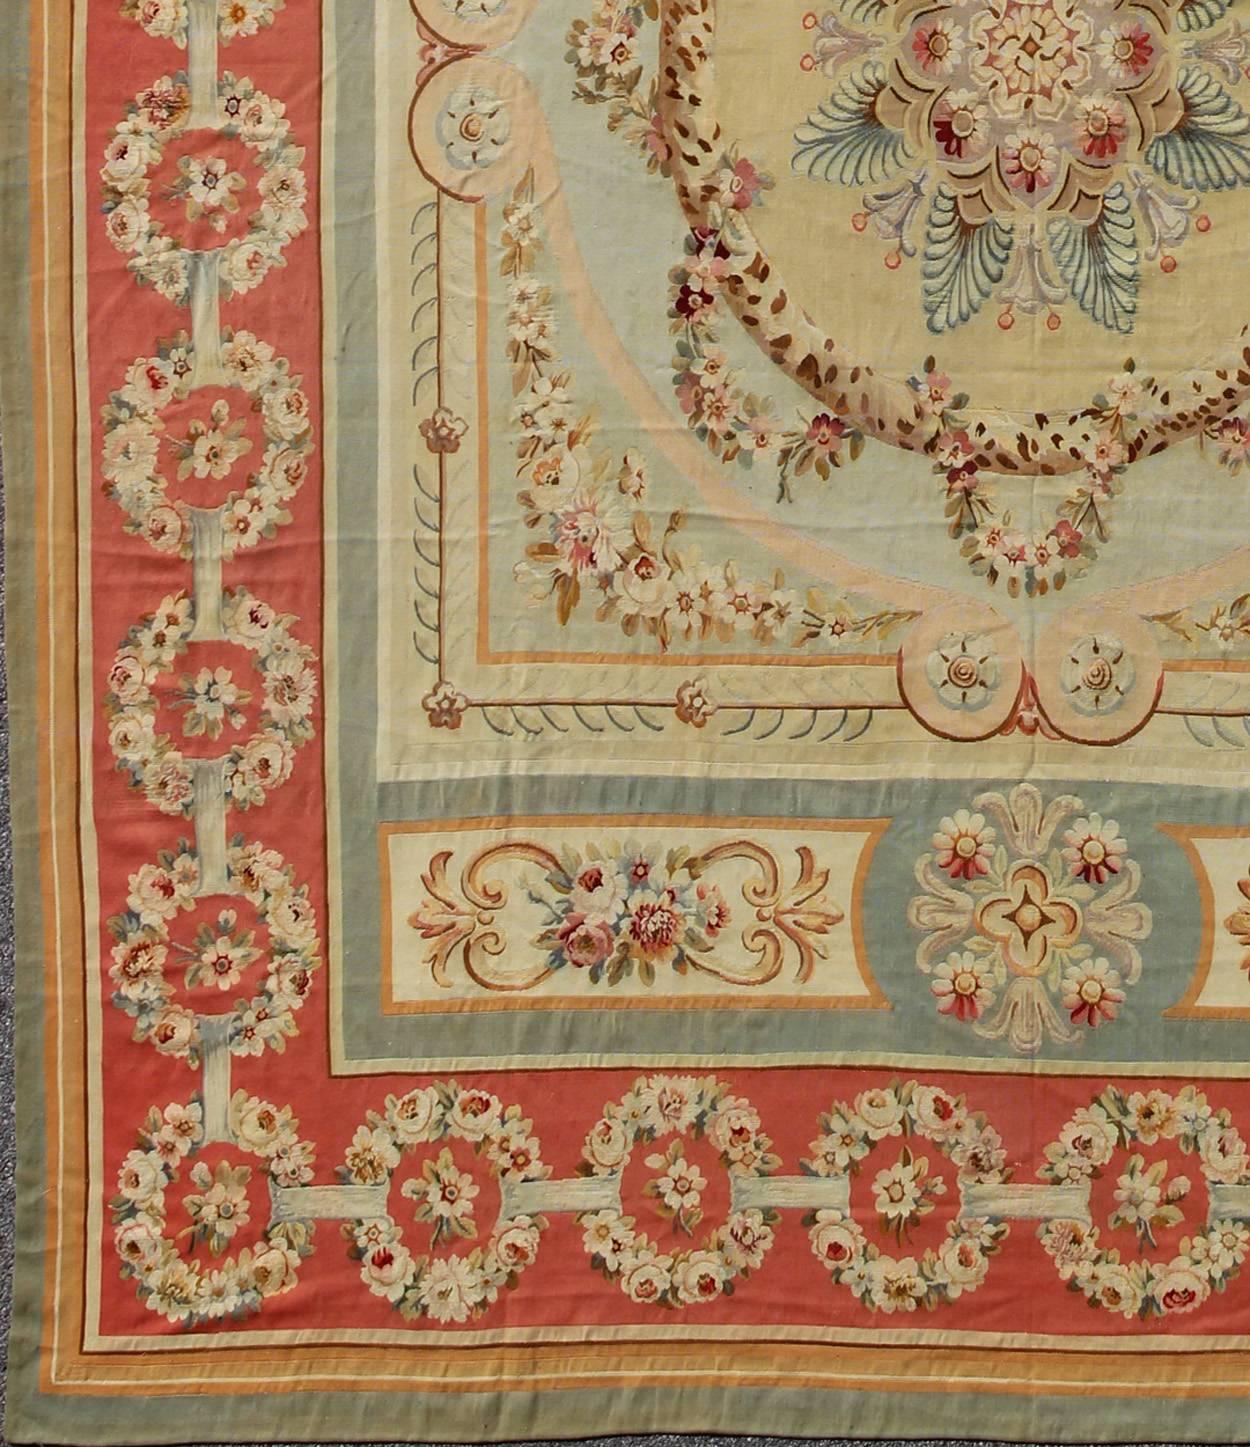 Antique French Aubusson Medallion Carpet with Garlands of Roses and Intricate Design
Some of the finest European tapestries and carpets have been woven in Aubusson in central France since the 17th century. This piece dates to the late 19th century,